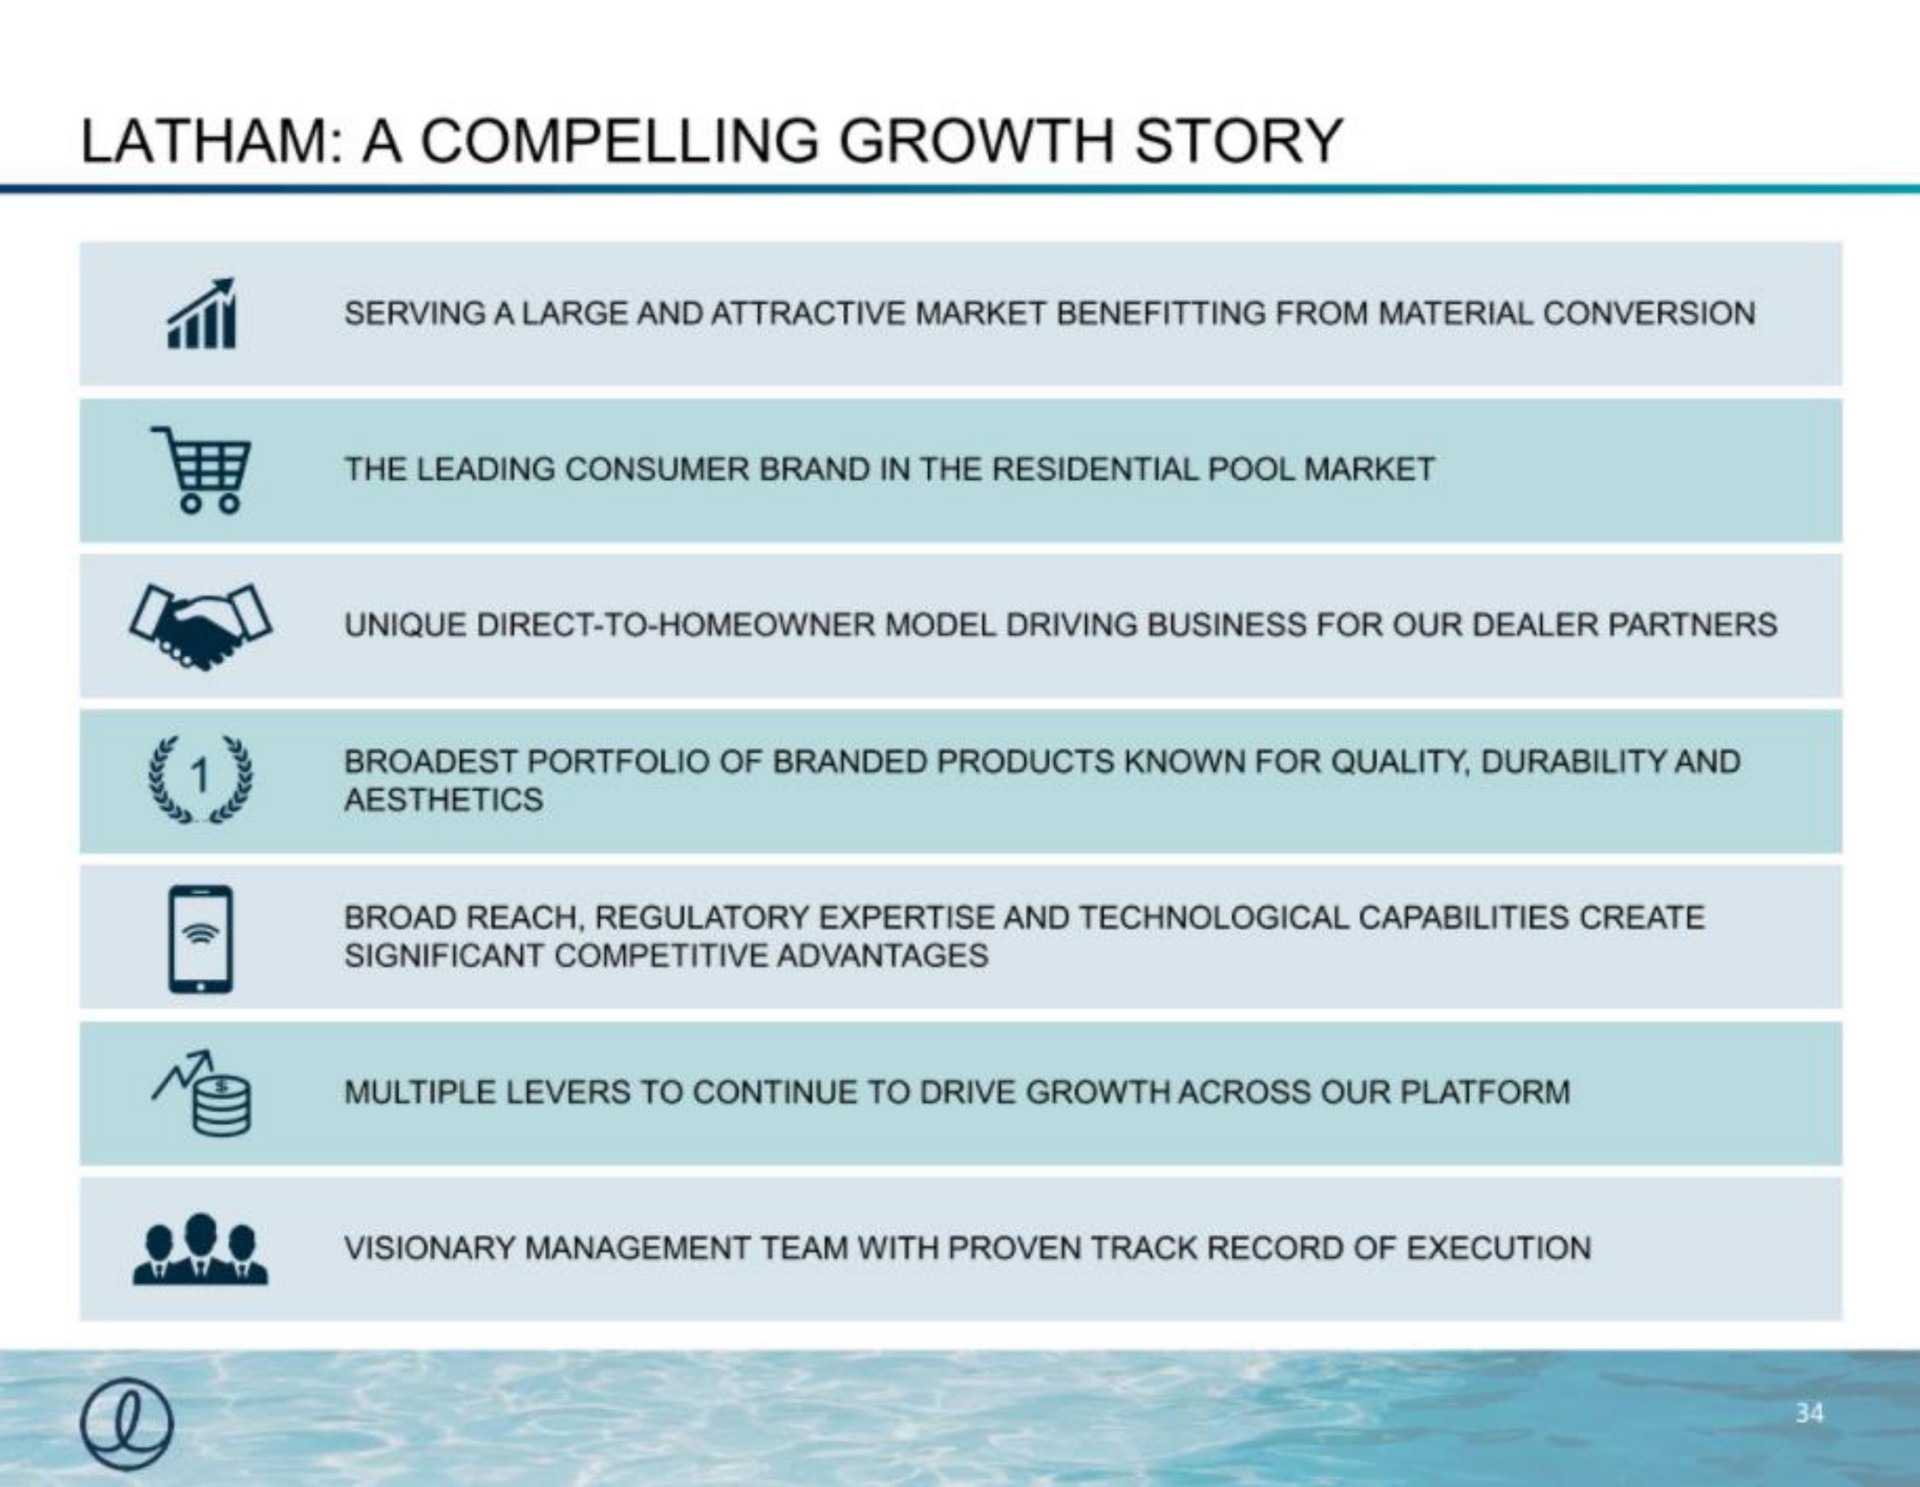 a compelling growth story | Latham Pool Company